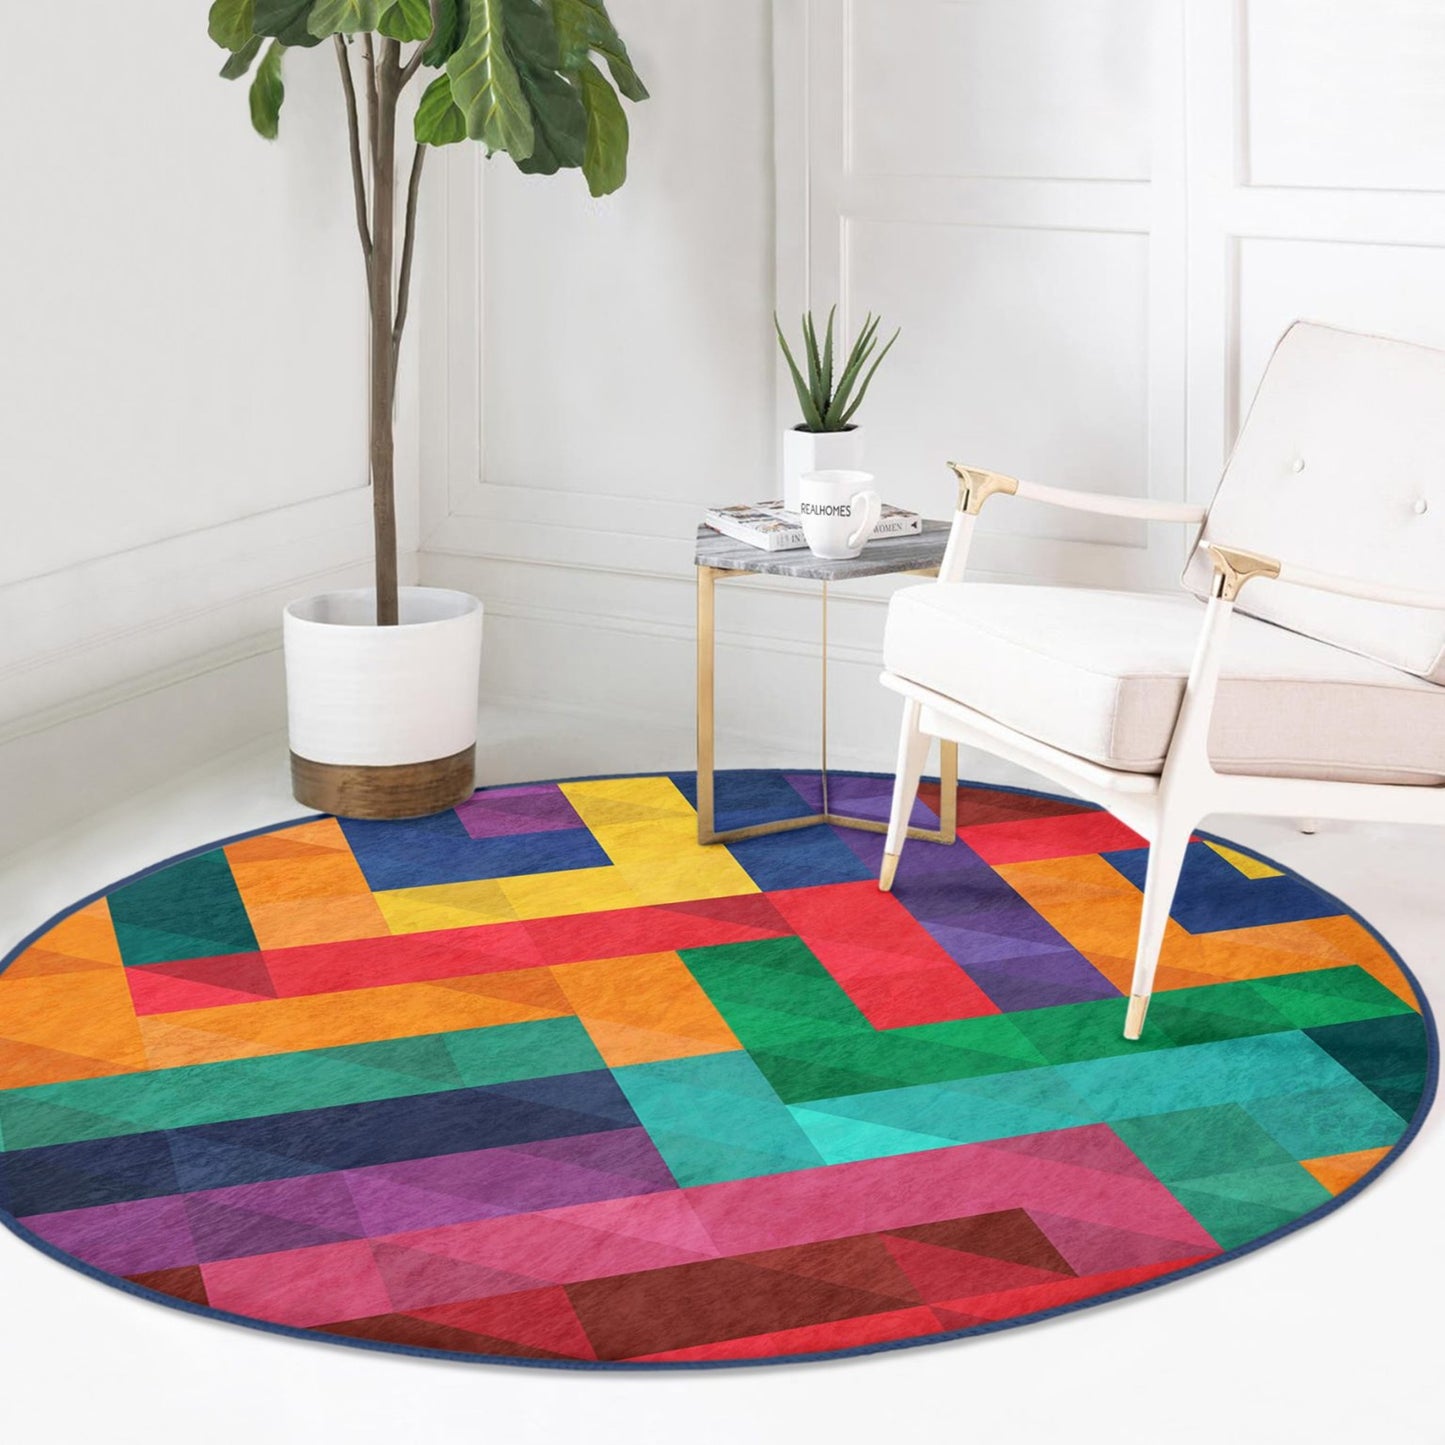 Round Patterned Floor Rug - Playful Accent